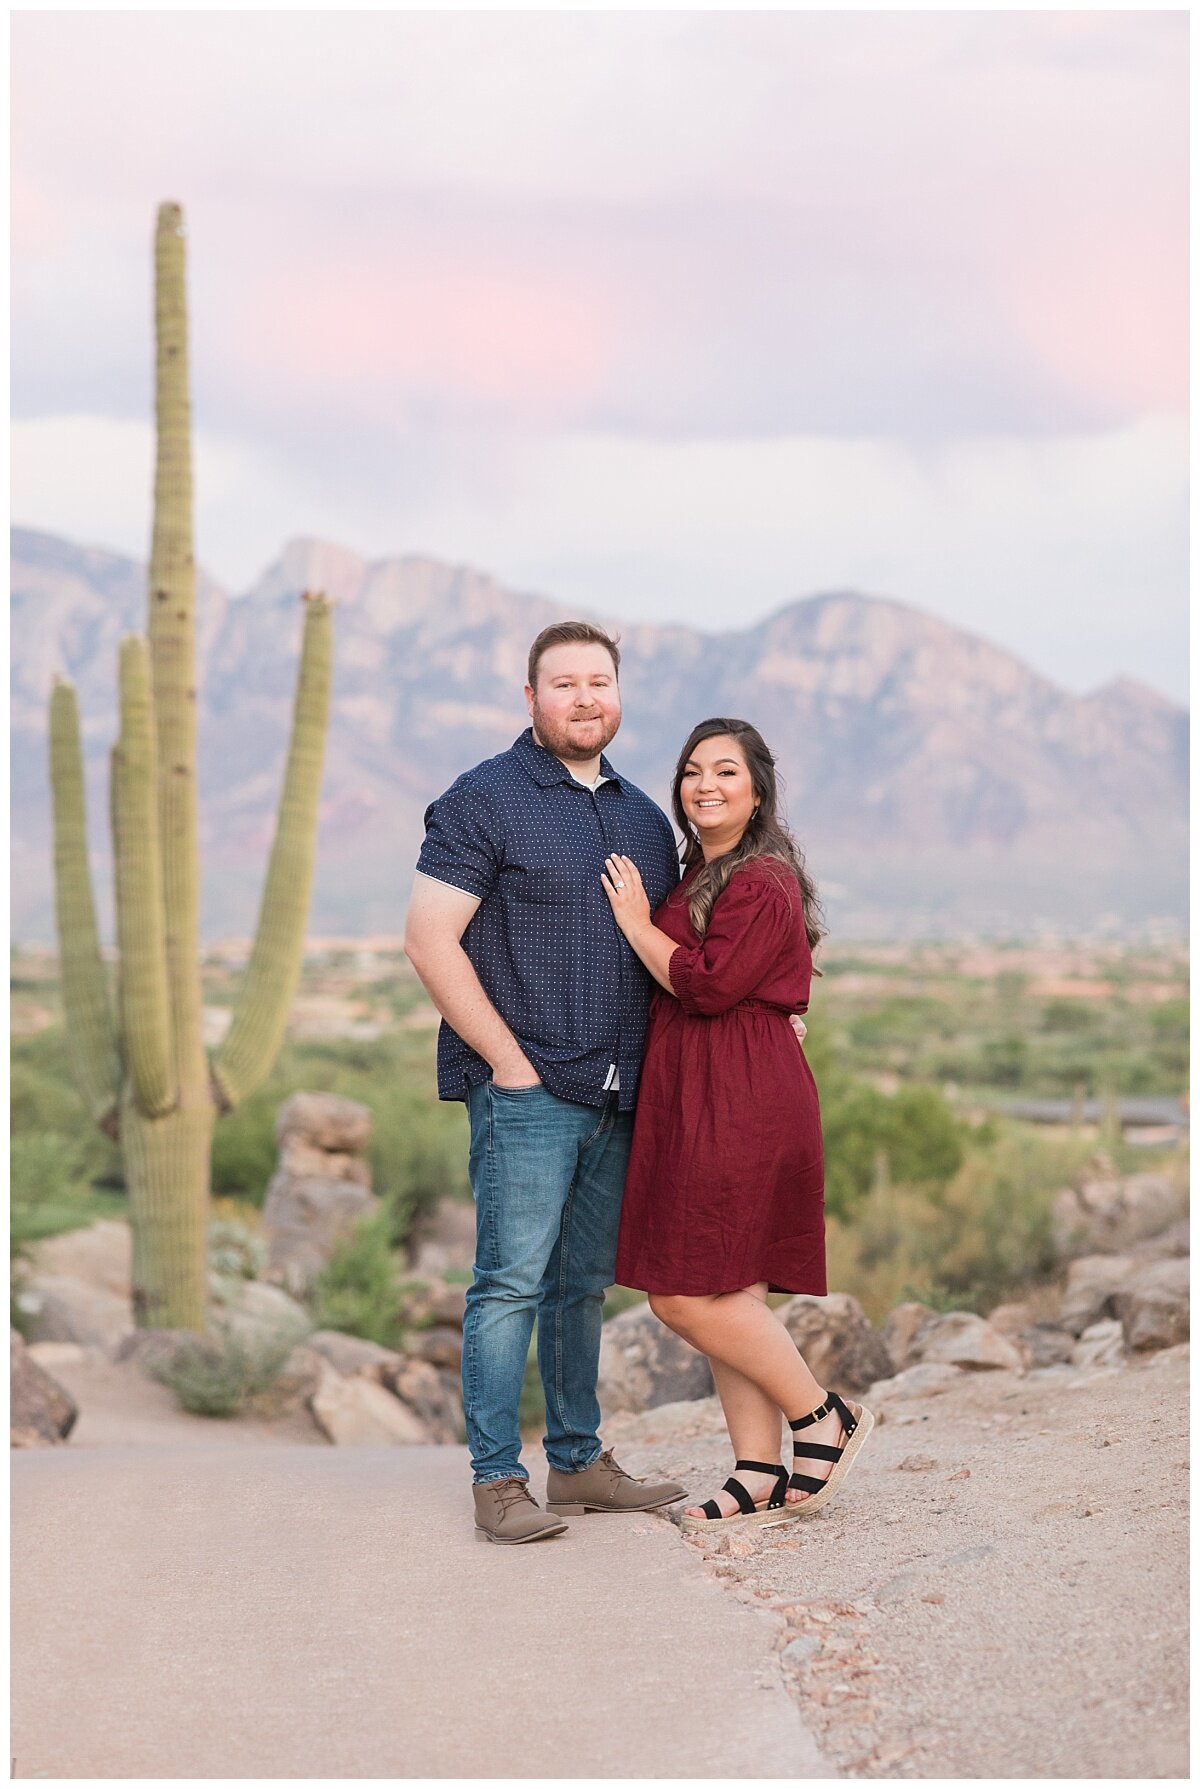 Sunset Engagement Session at Stone Canyon Community in Oro Valley, Arizona